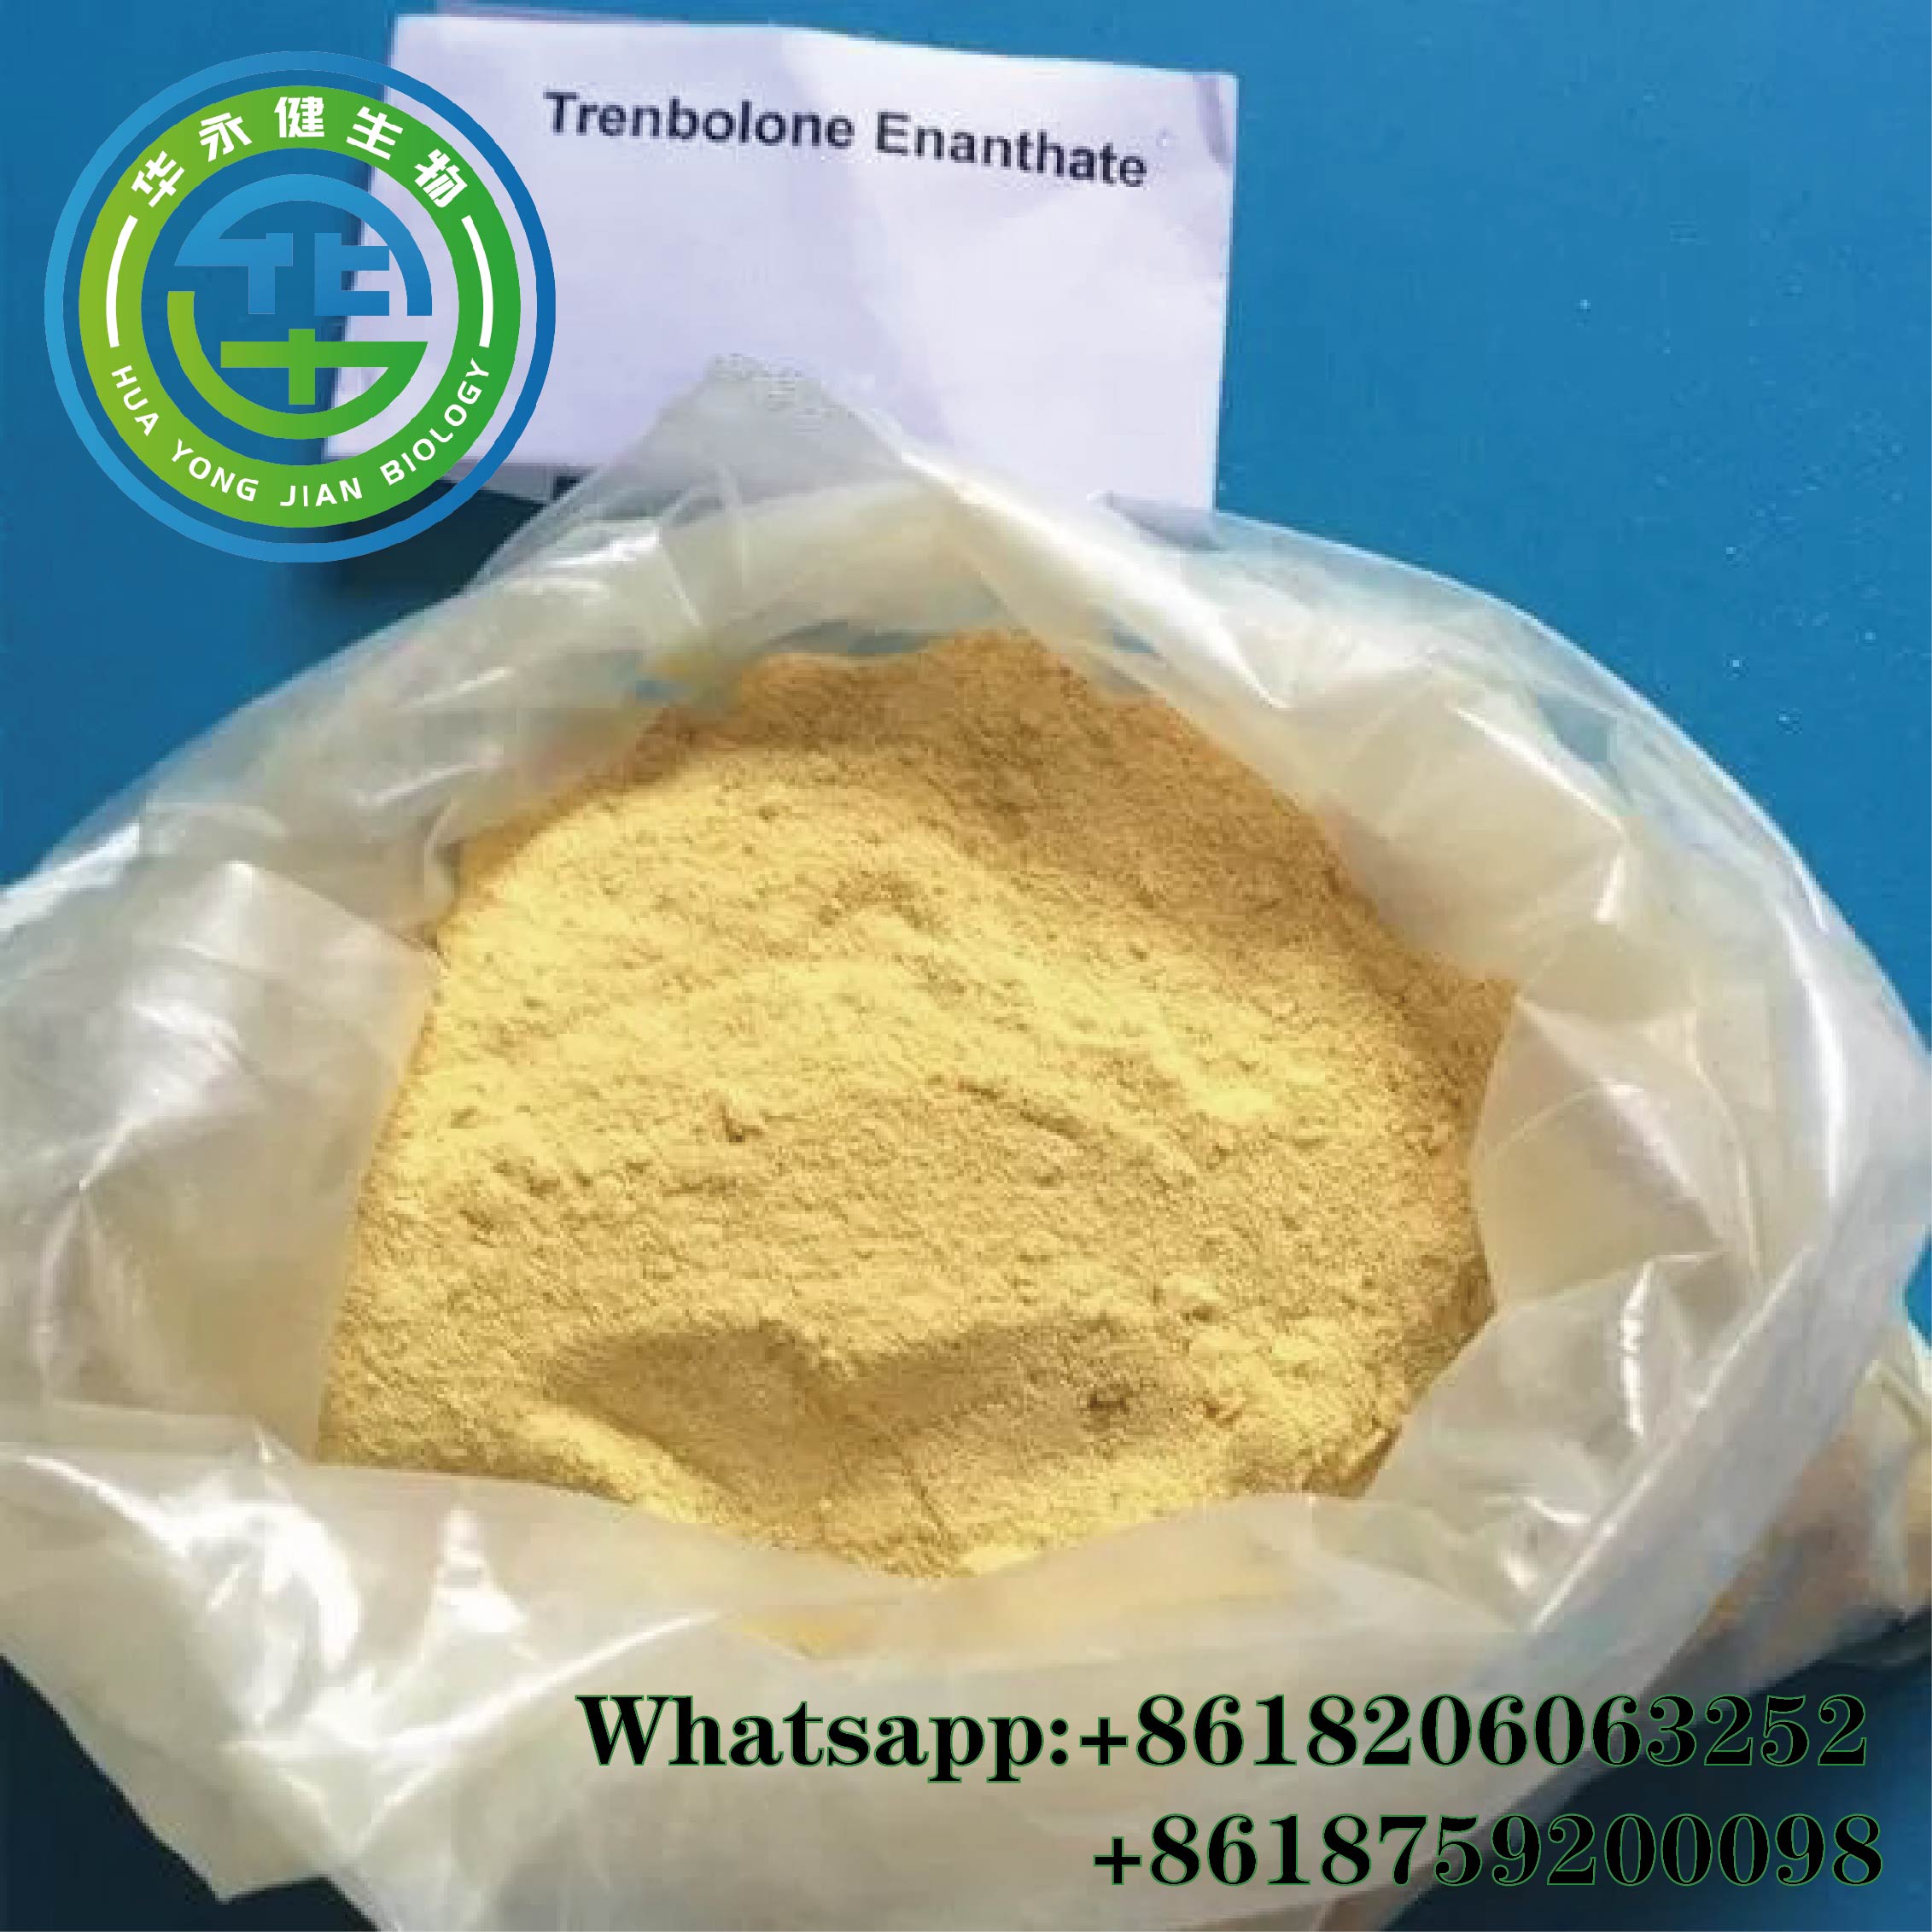 Trenbolone Enanthate Powder Tren Anabolic Steroid For Muscle Gainning Parabolan CasNO.472-61-5